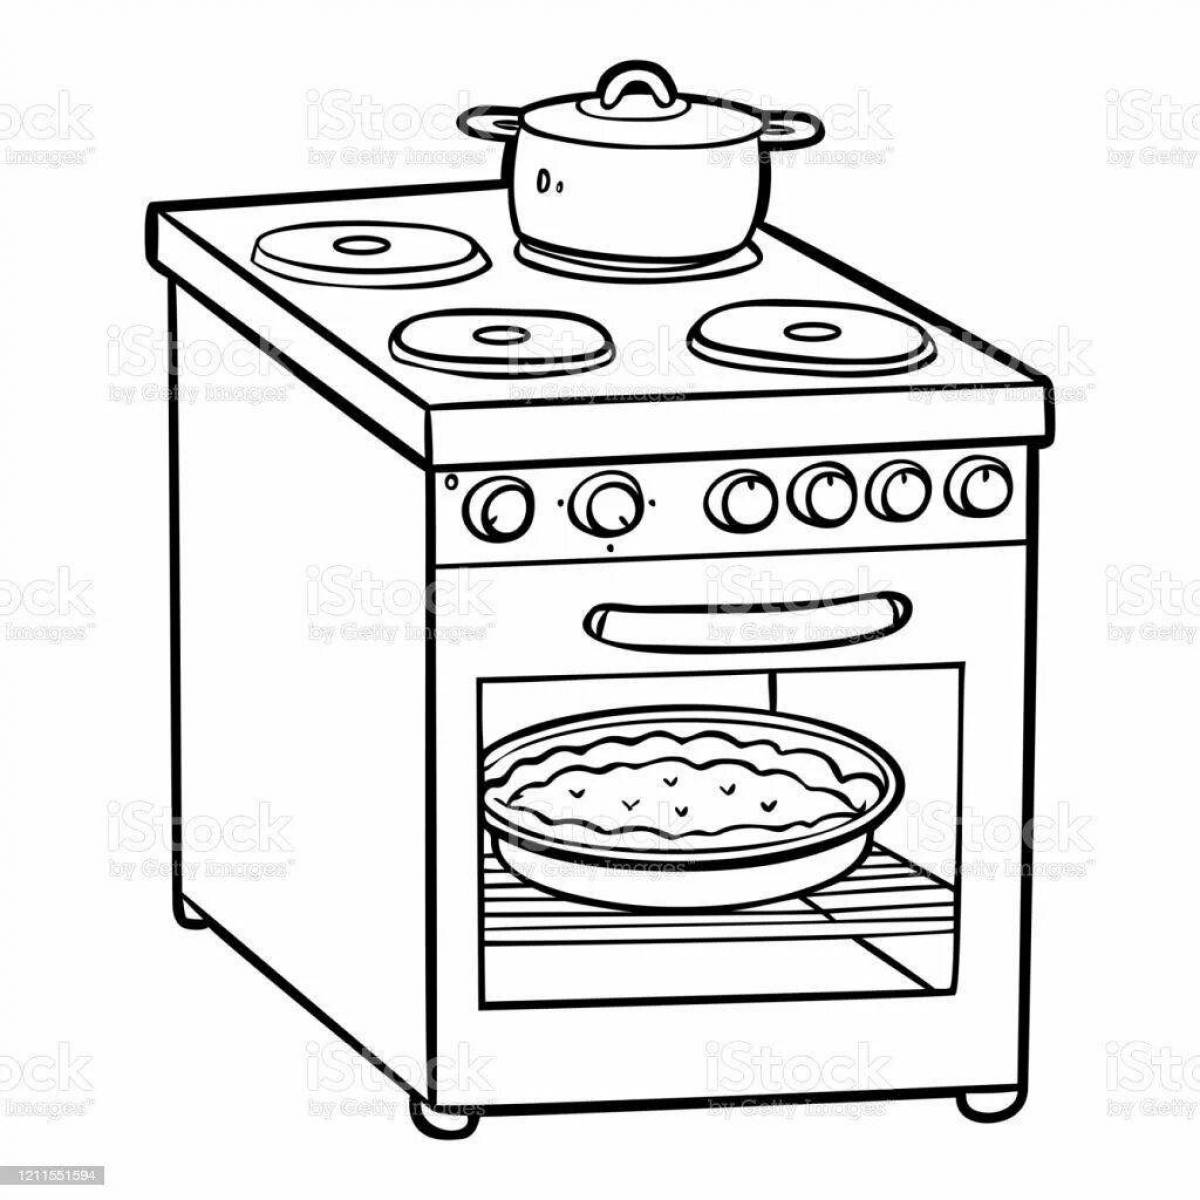 Exciting oven coloring page